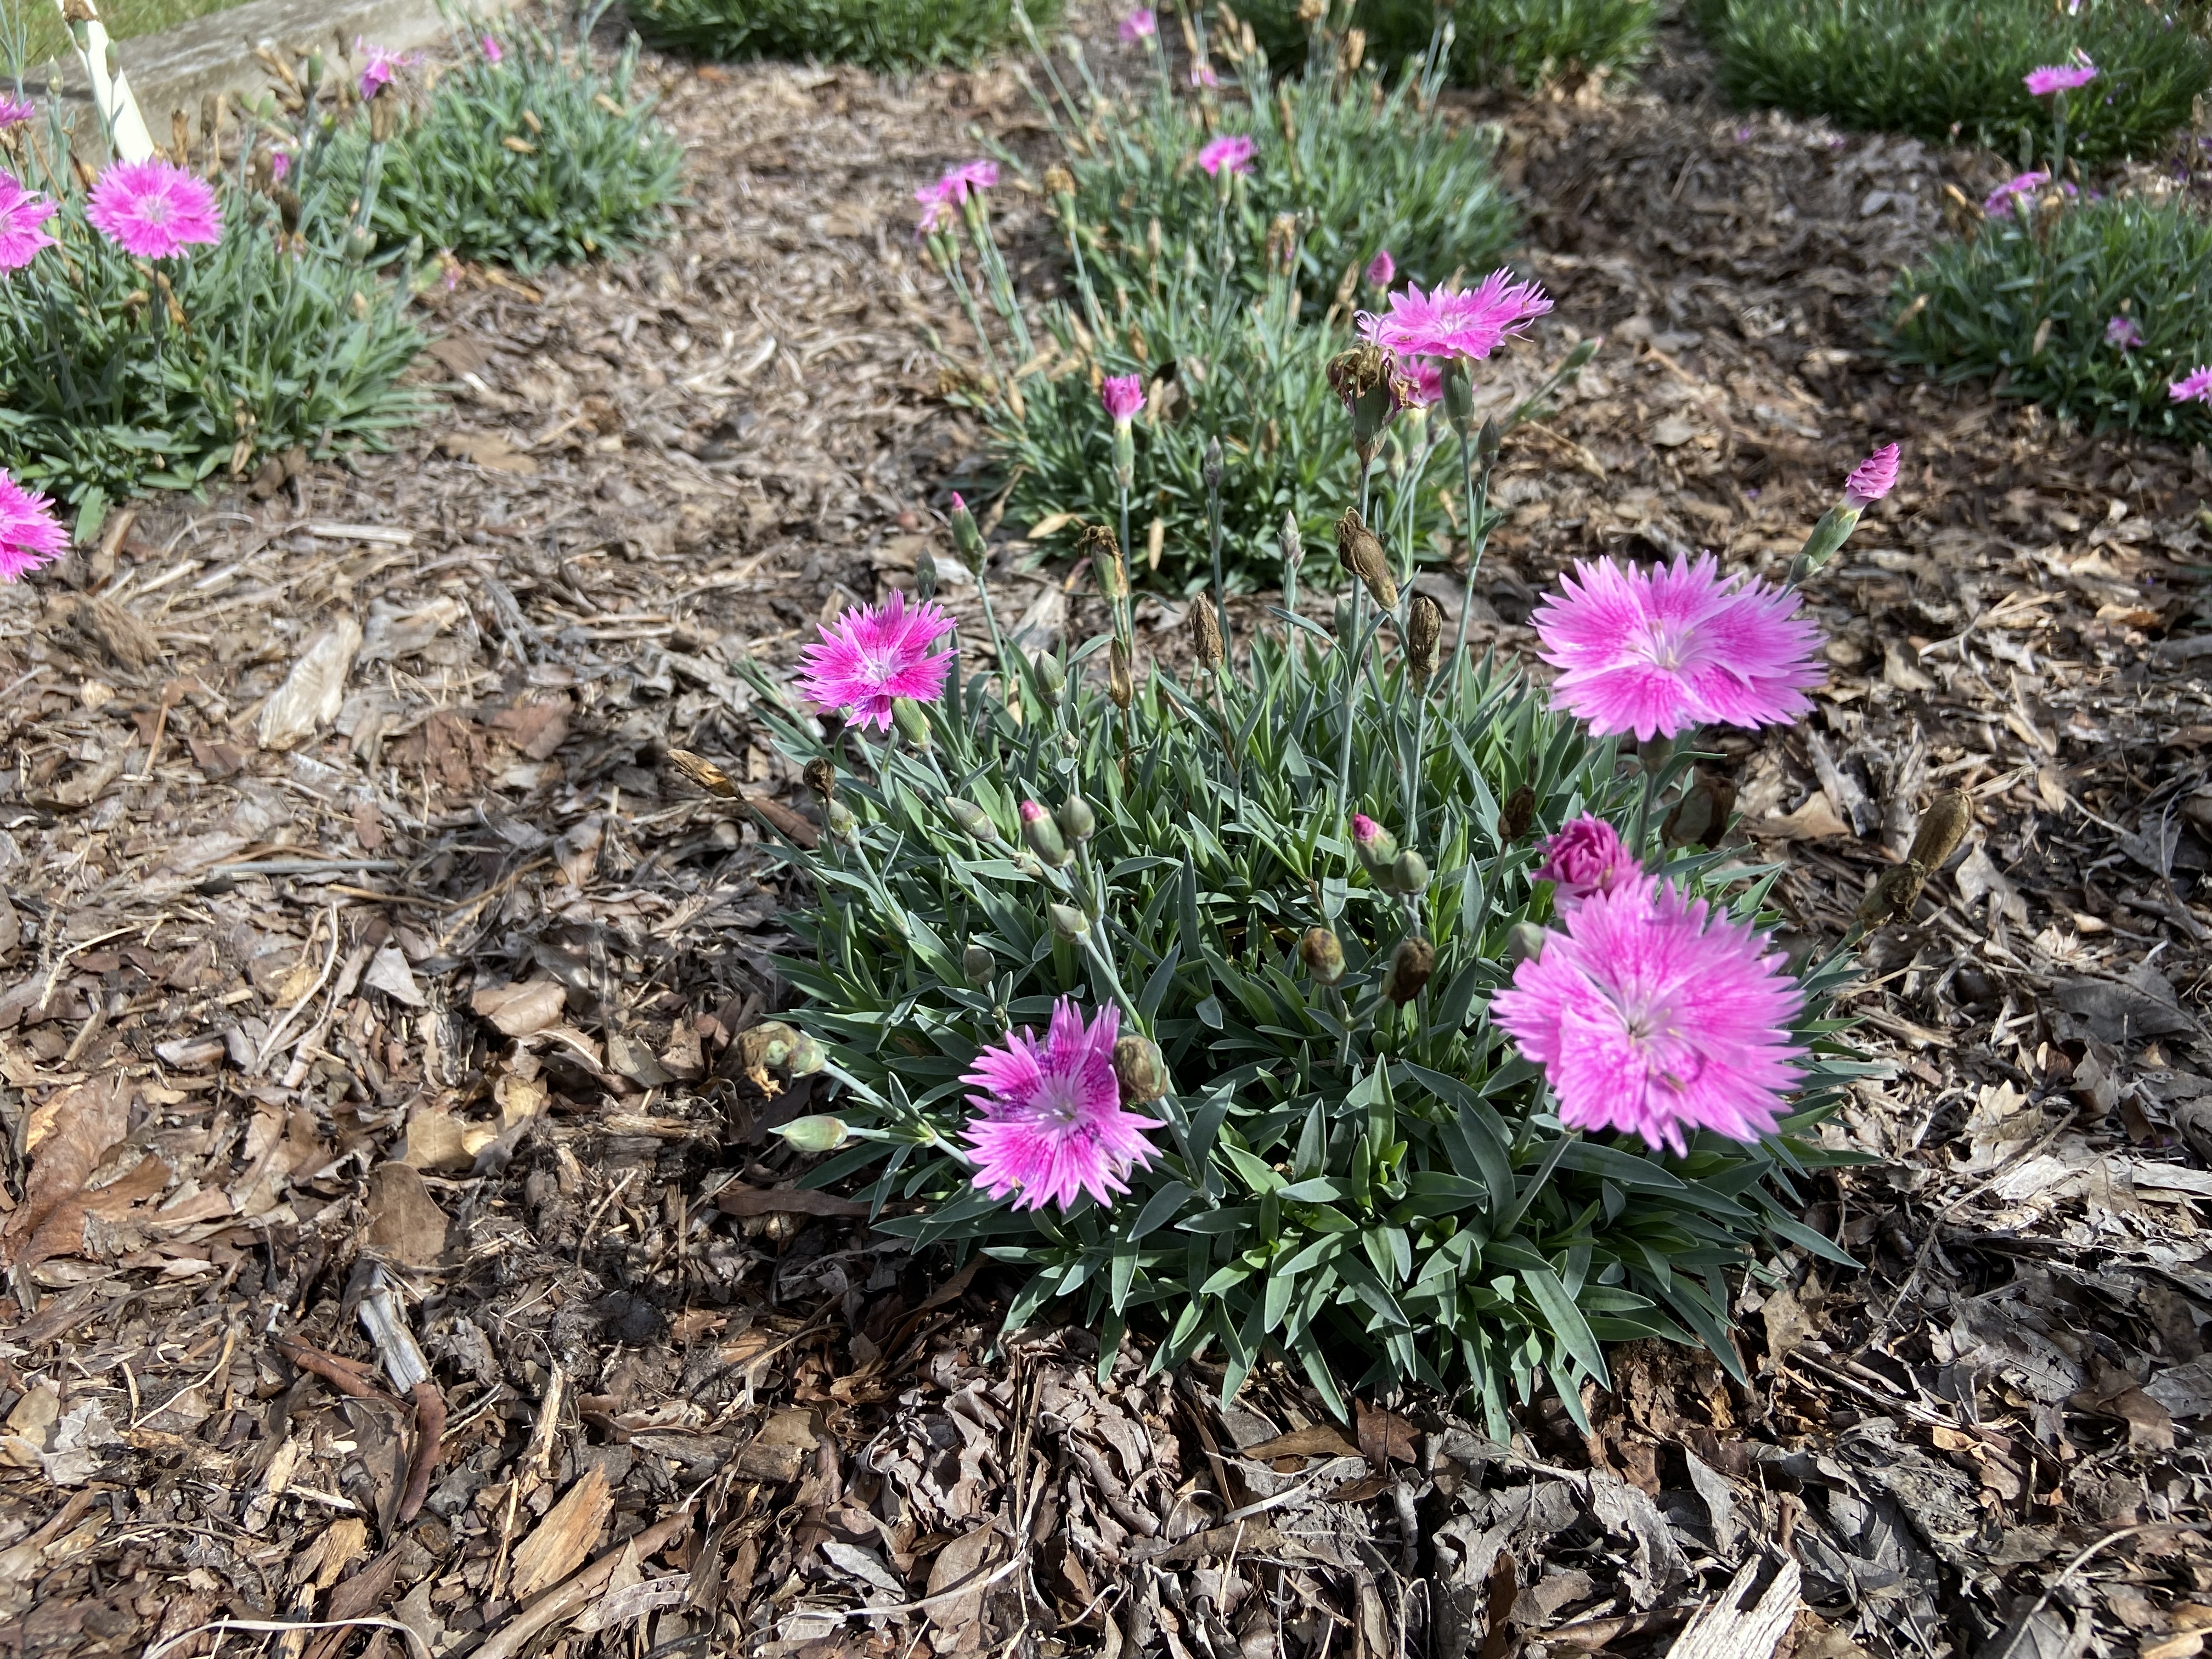 Dianthus 'G18139' - EverBloom Watermelon Ice pink